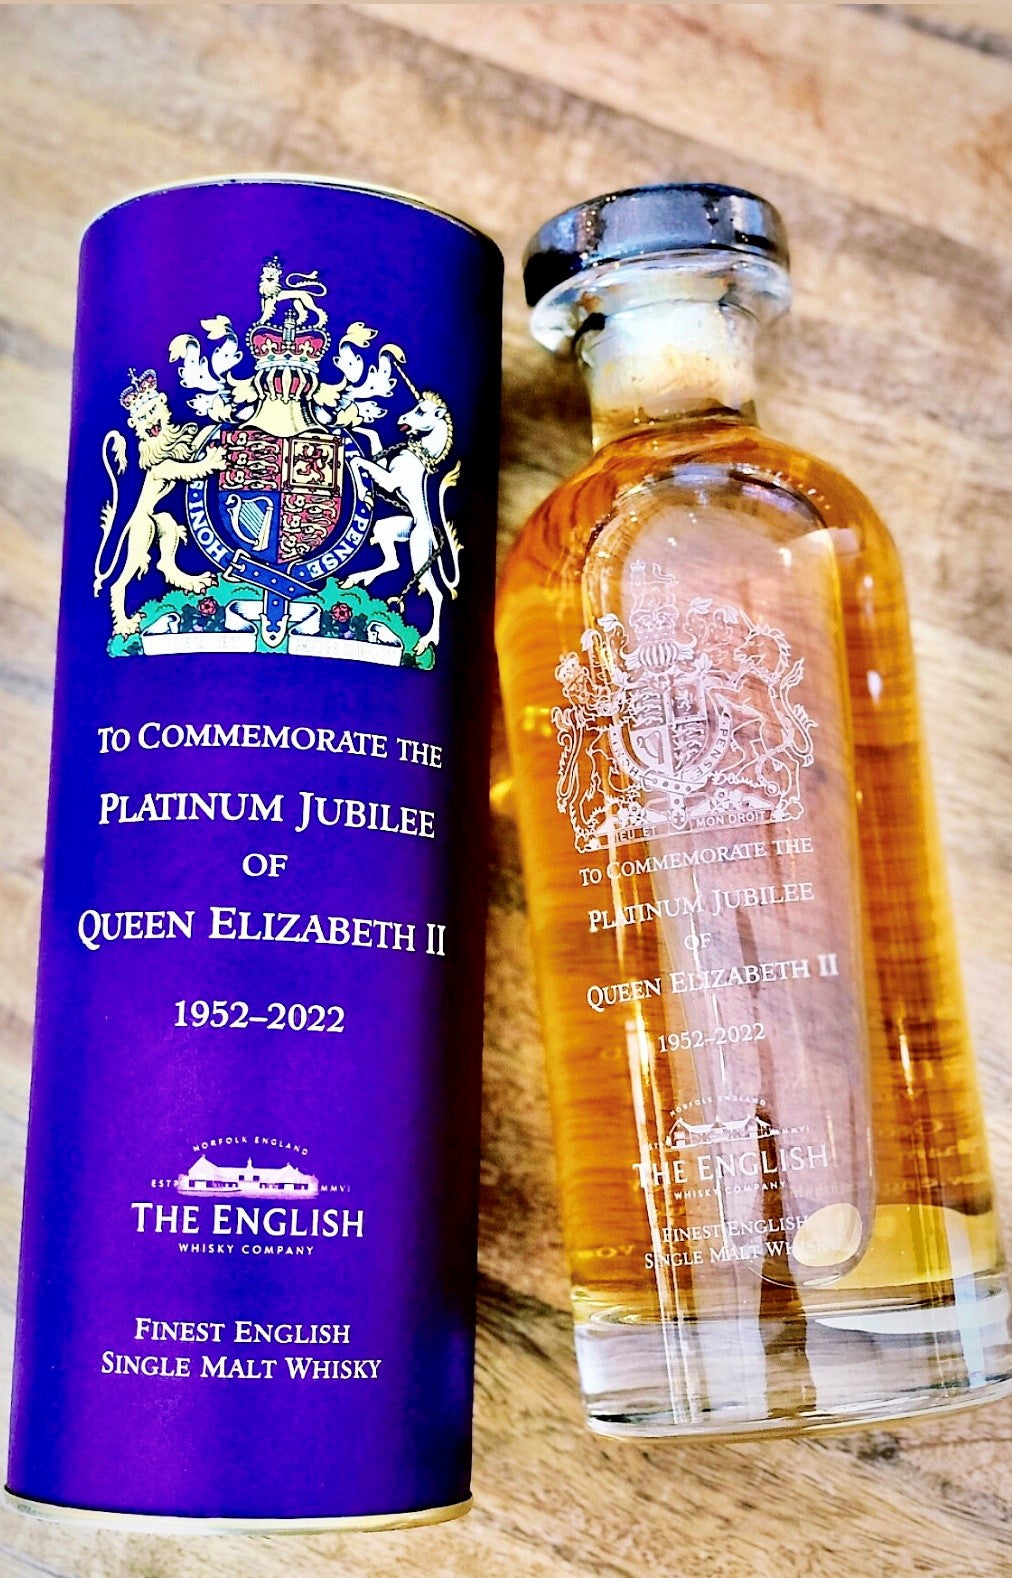 Bottle of The English Royal Platinum Jubilee Whisky - The Spirits Room